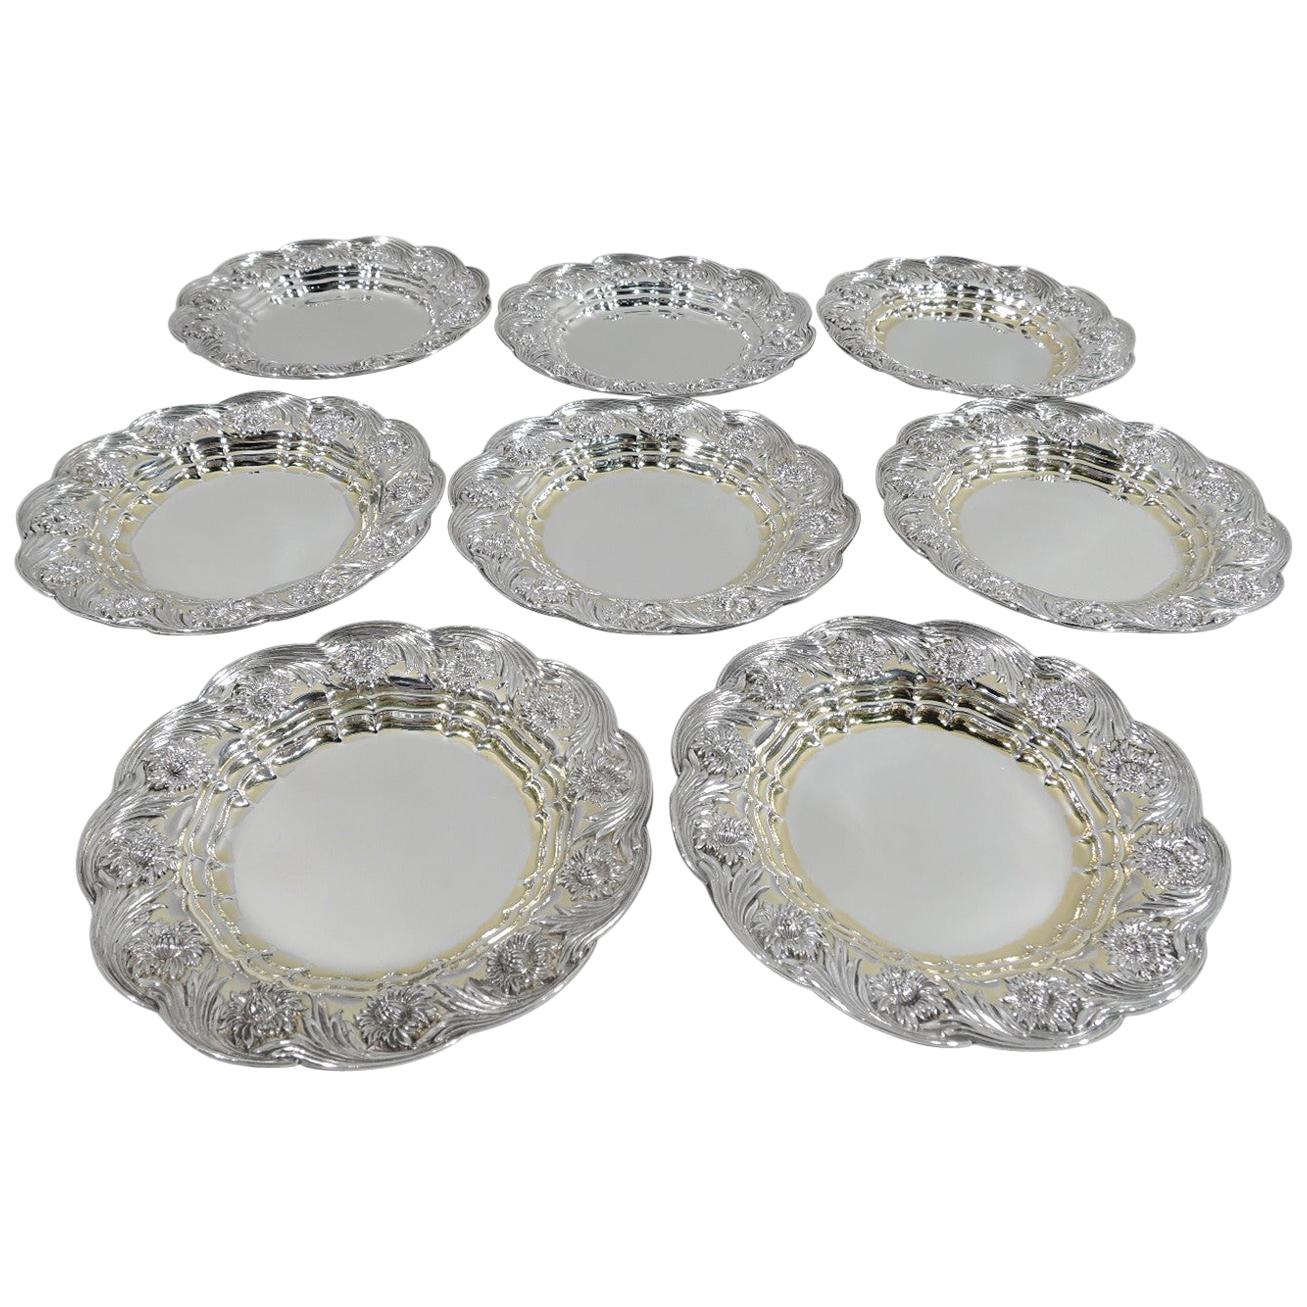 Set of 8 Antique Hard-to-Find Tiffany Chrysanthemum Butter Pats